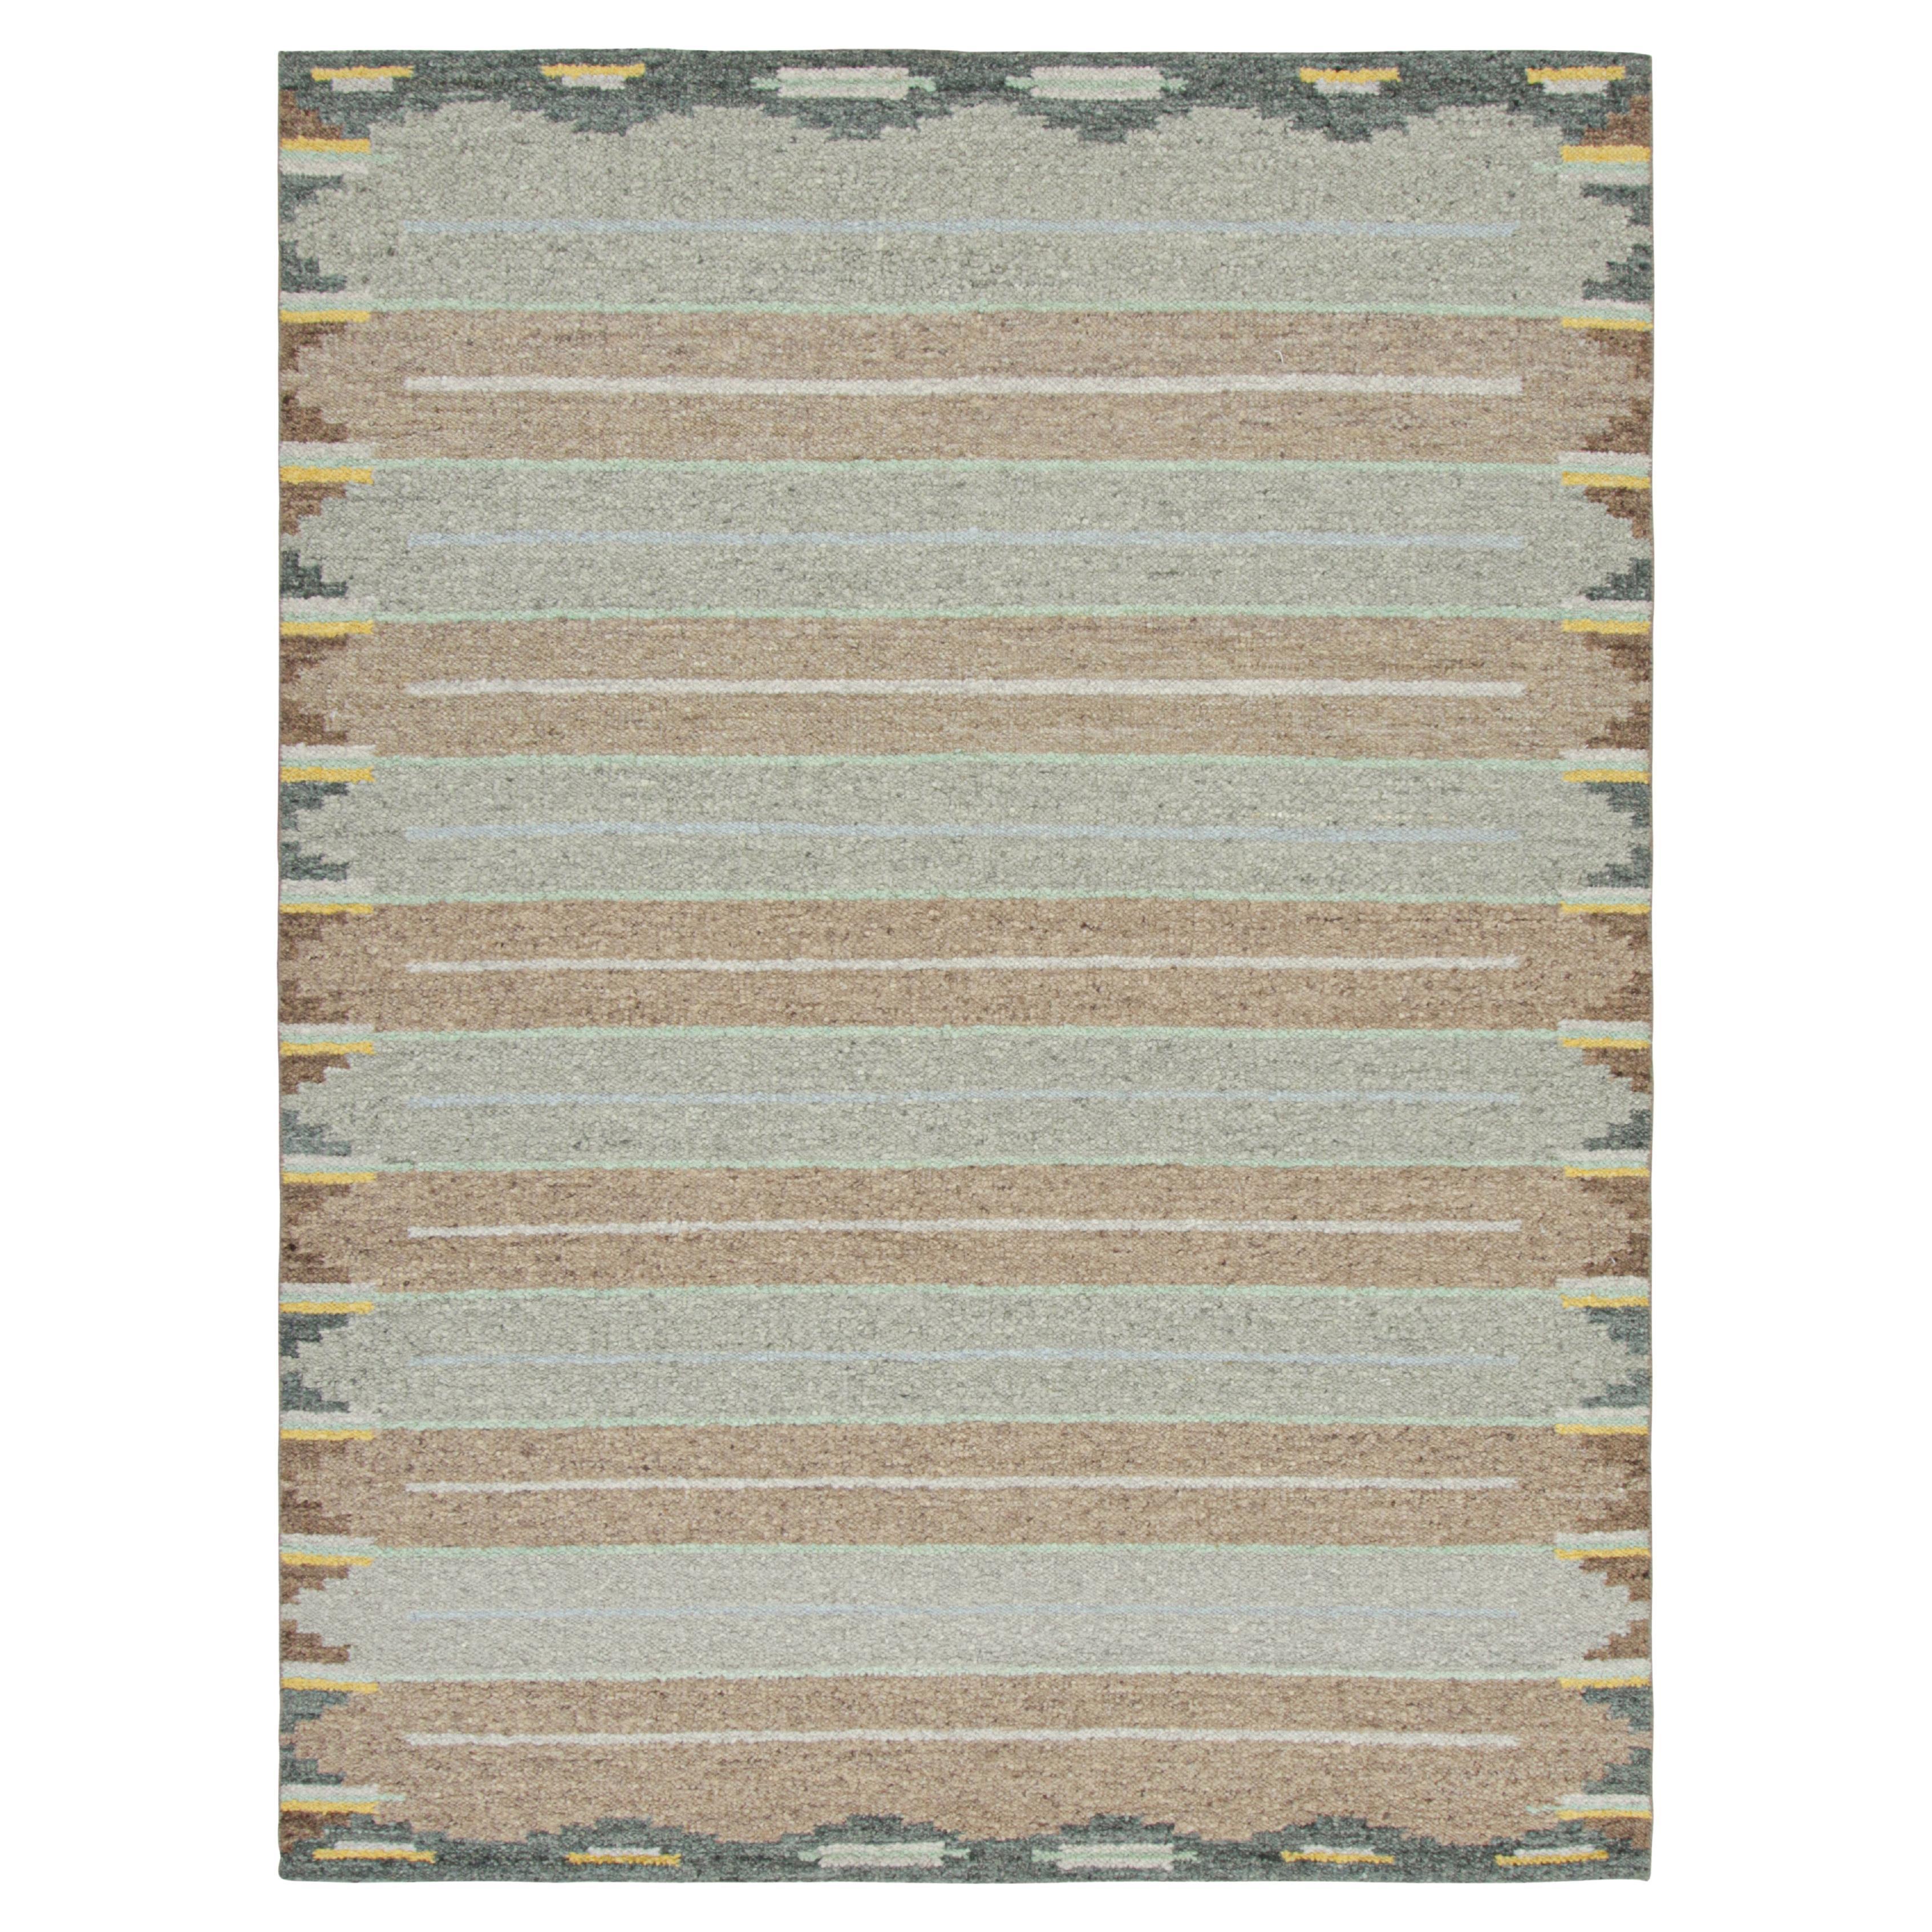 Rug & Kilim’s Scandinavian Style Rug with Brown and Green Geometric Patterns